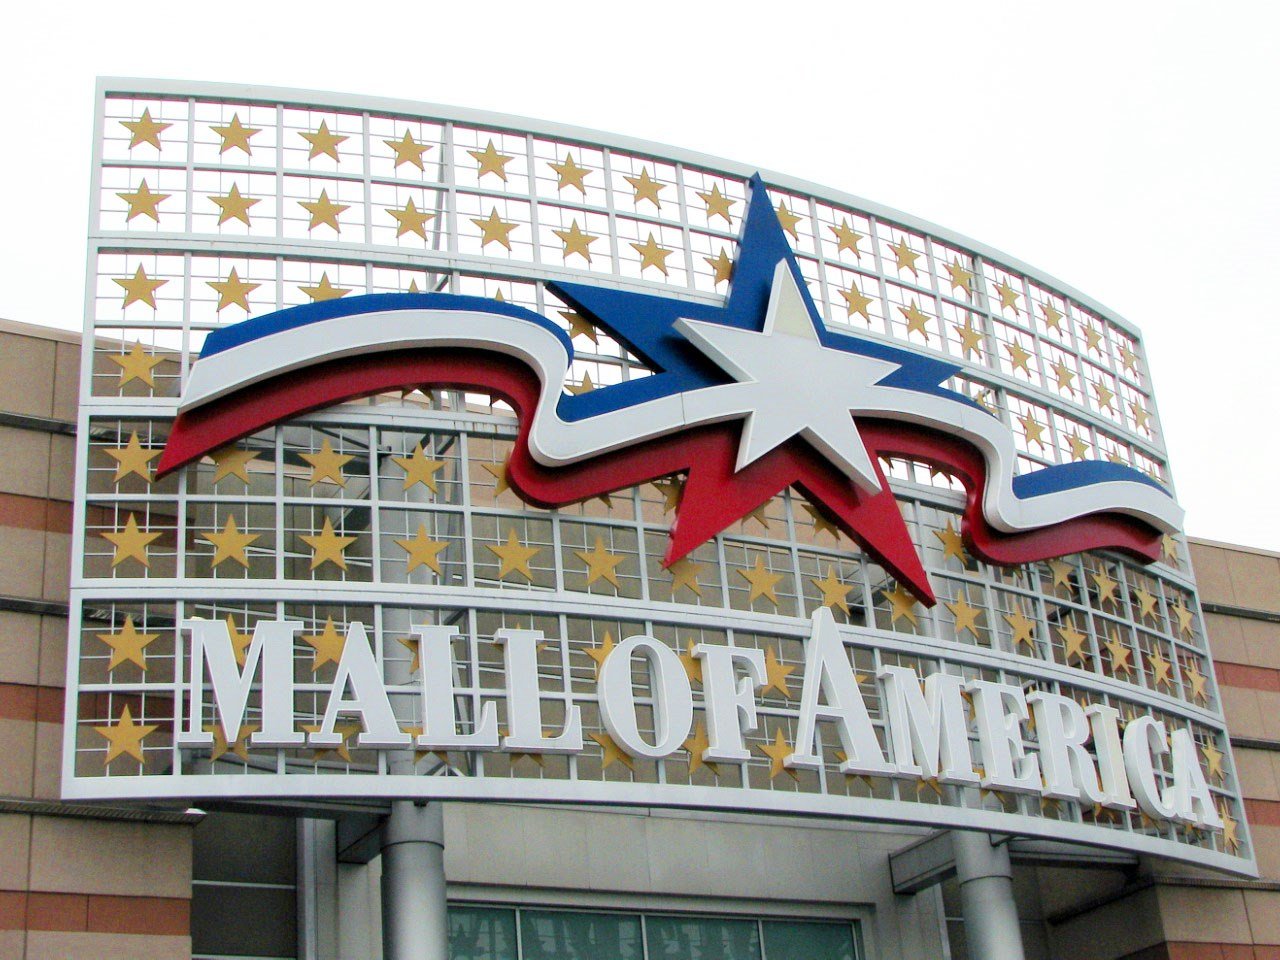 Child hurt, suspect arrested in Mall of America incident WWAYTV3